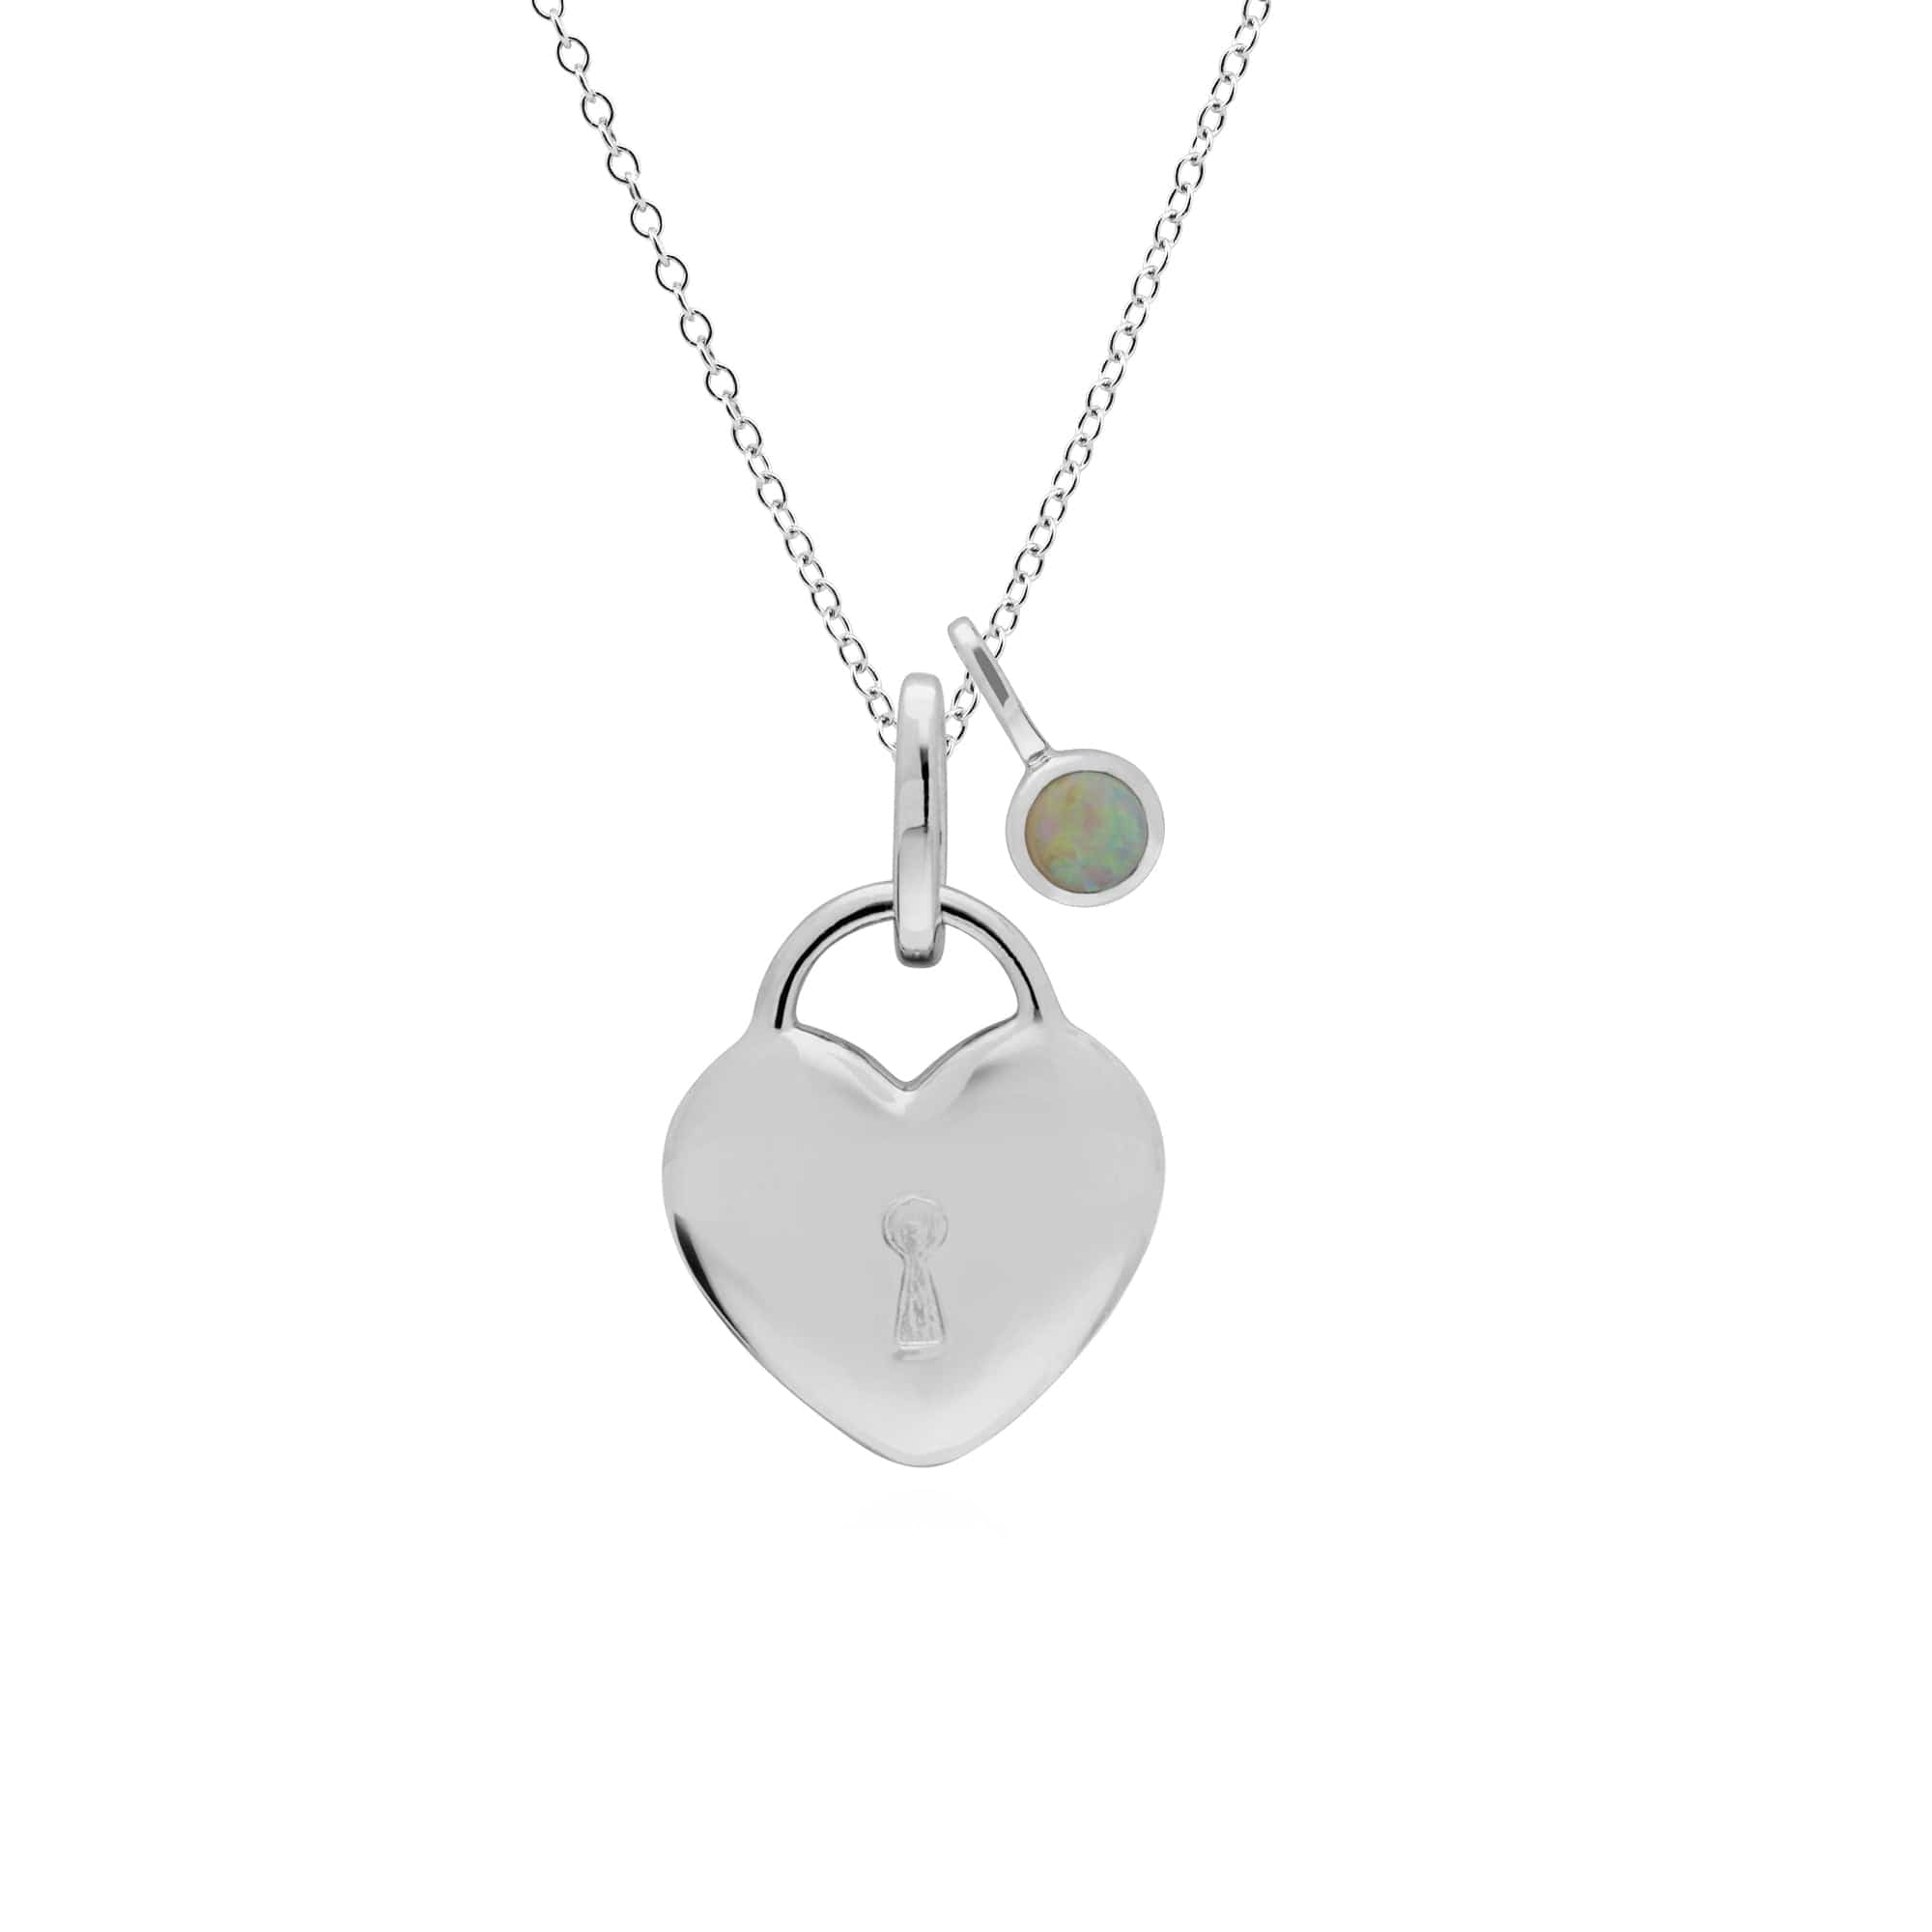 270P028402925-270P027001925 Classic Heart Lock Pendant & Opal Charm in 925 Sterling Silver 1